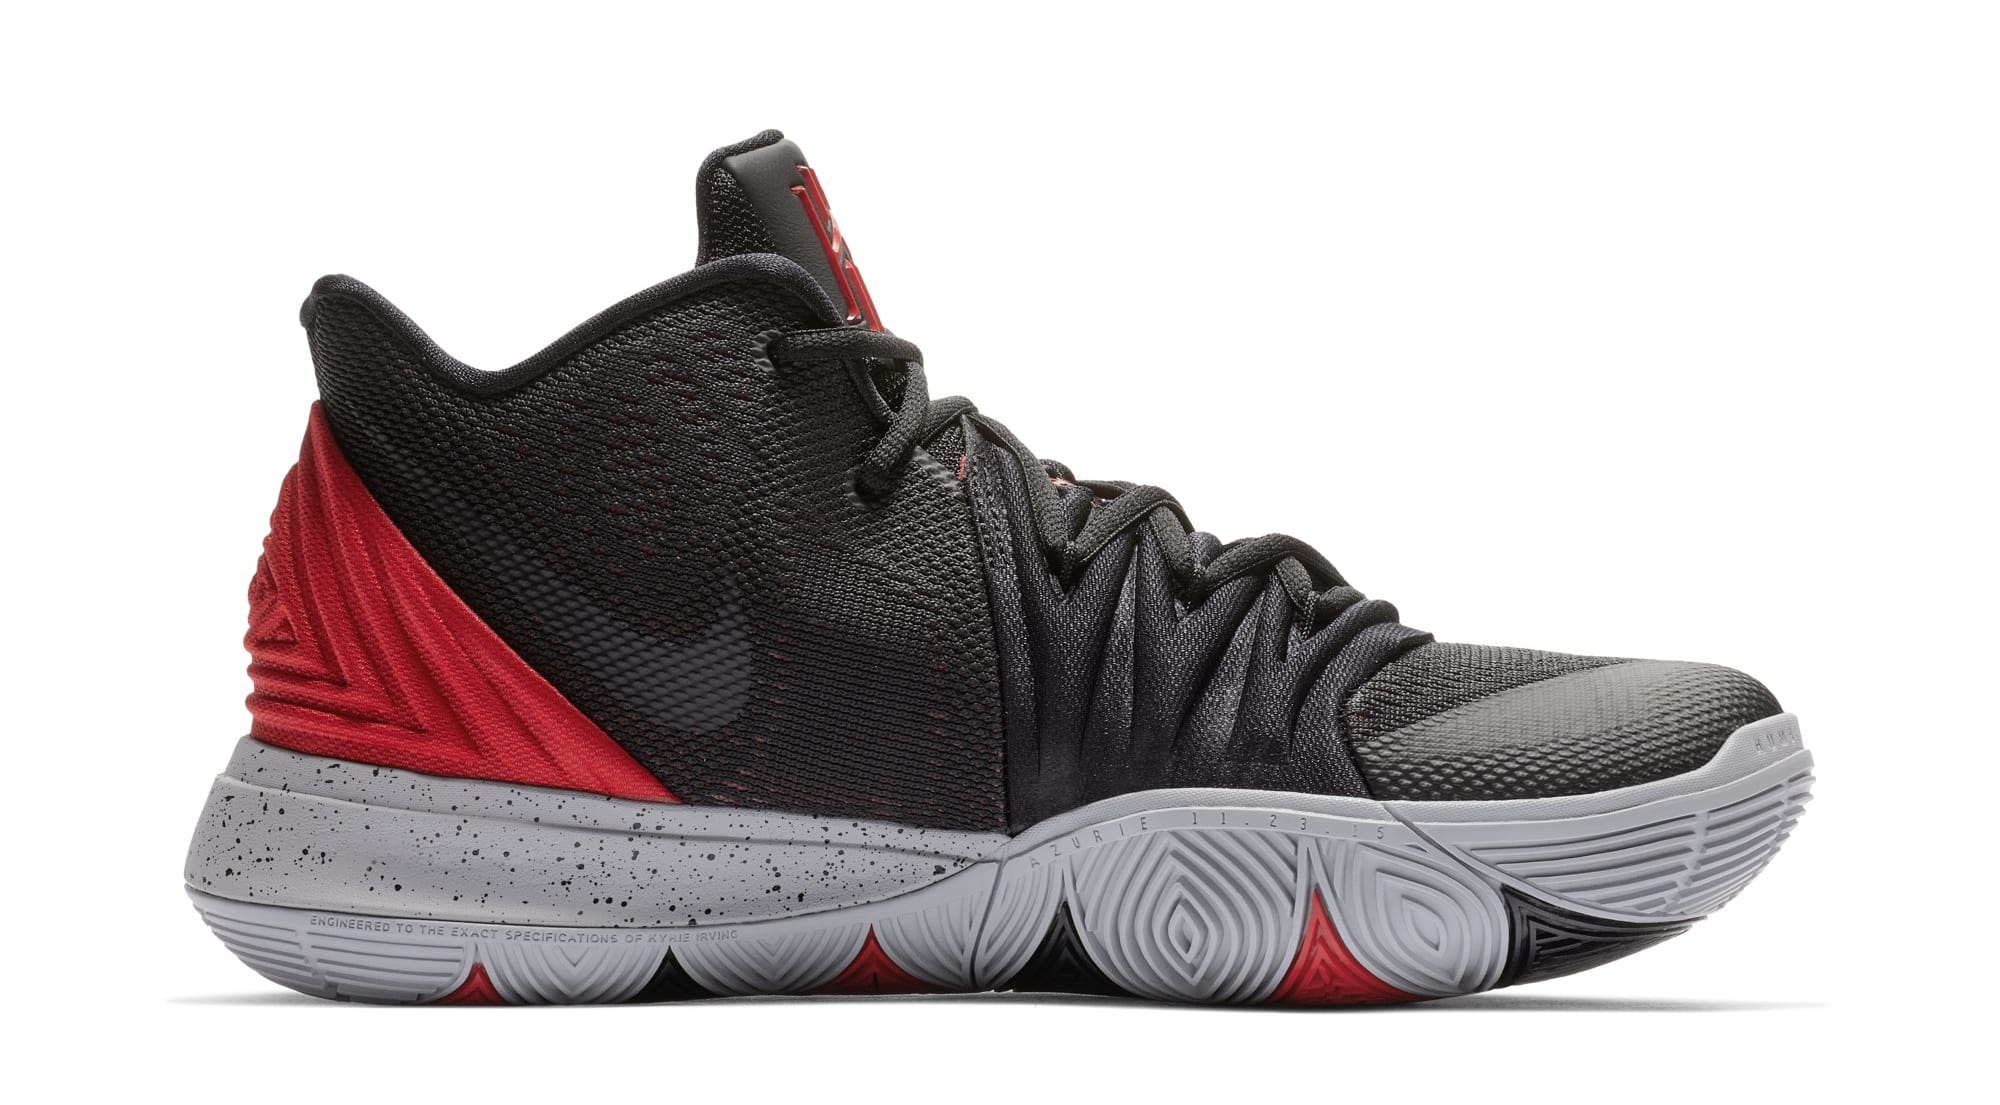 kyrie 5s red